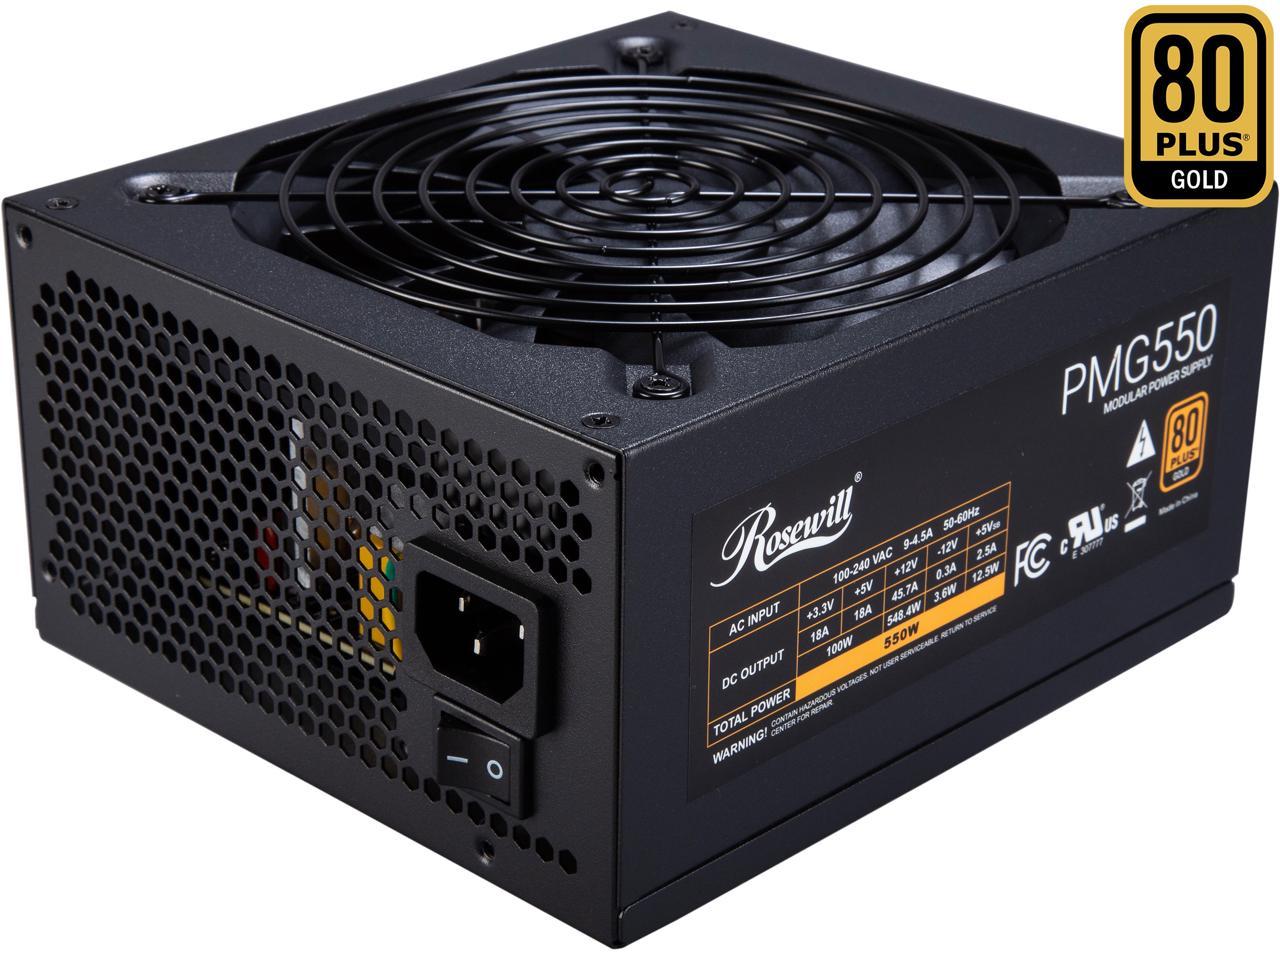 Rosewill PMG 550W 80 Plus Gold Fully Modular Power Supply (Black) $40 + Free Shipping